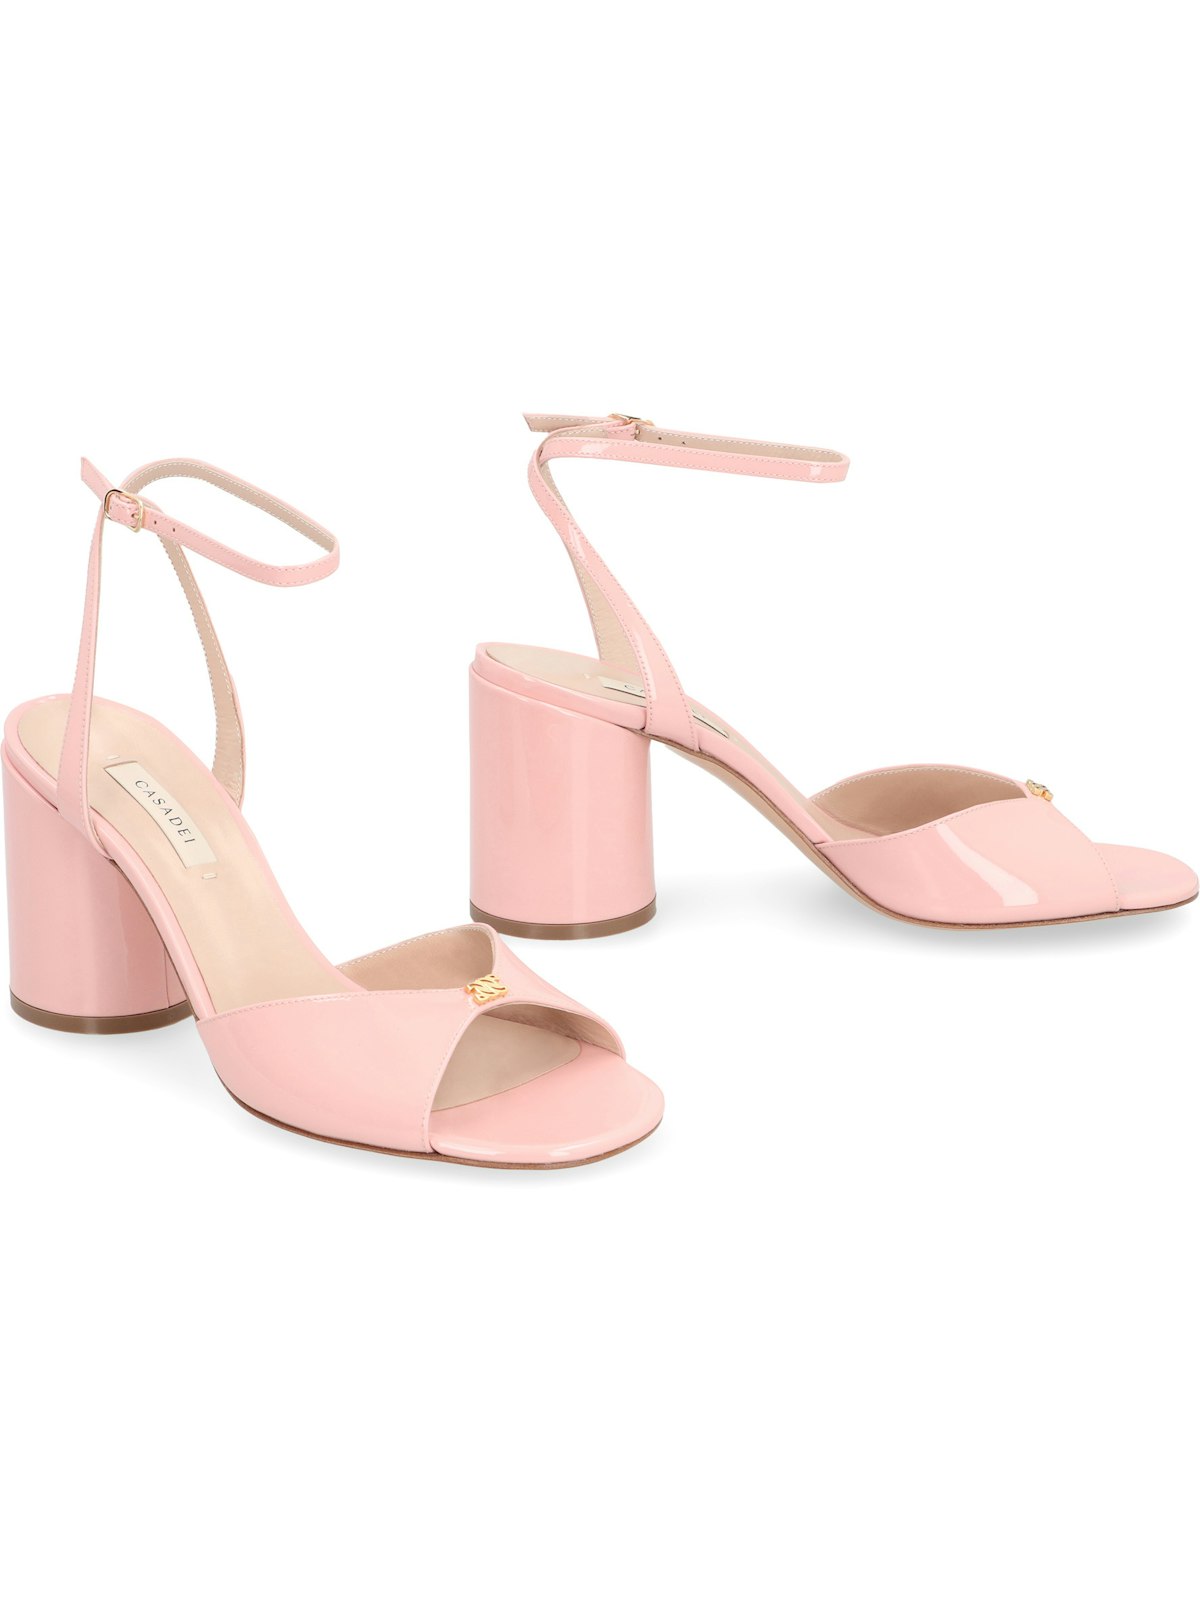 4108 CASADEI TIFFANY PATENT LEATHER SANDALS